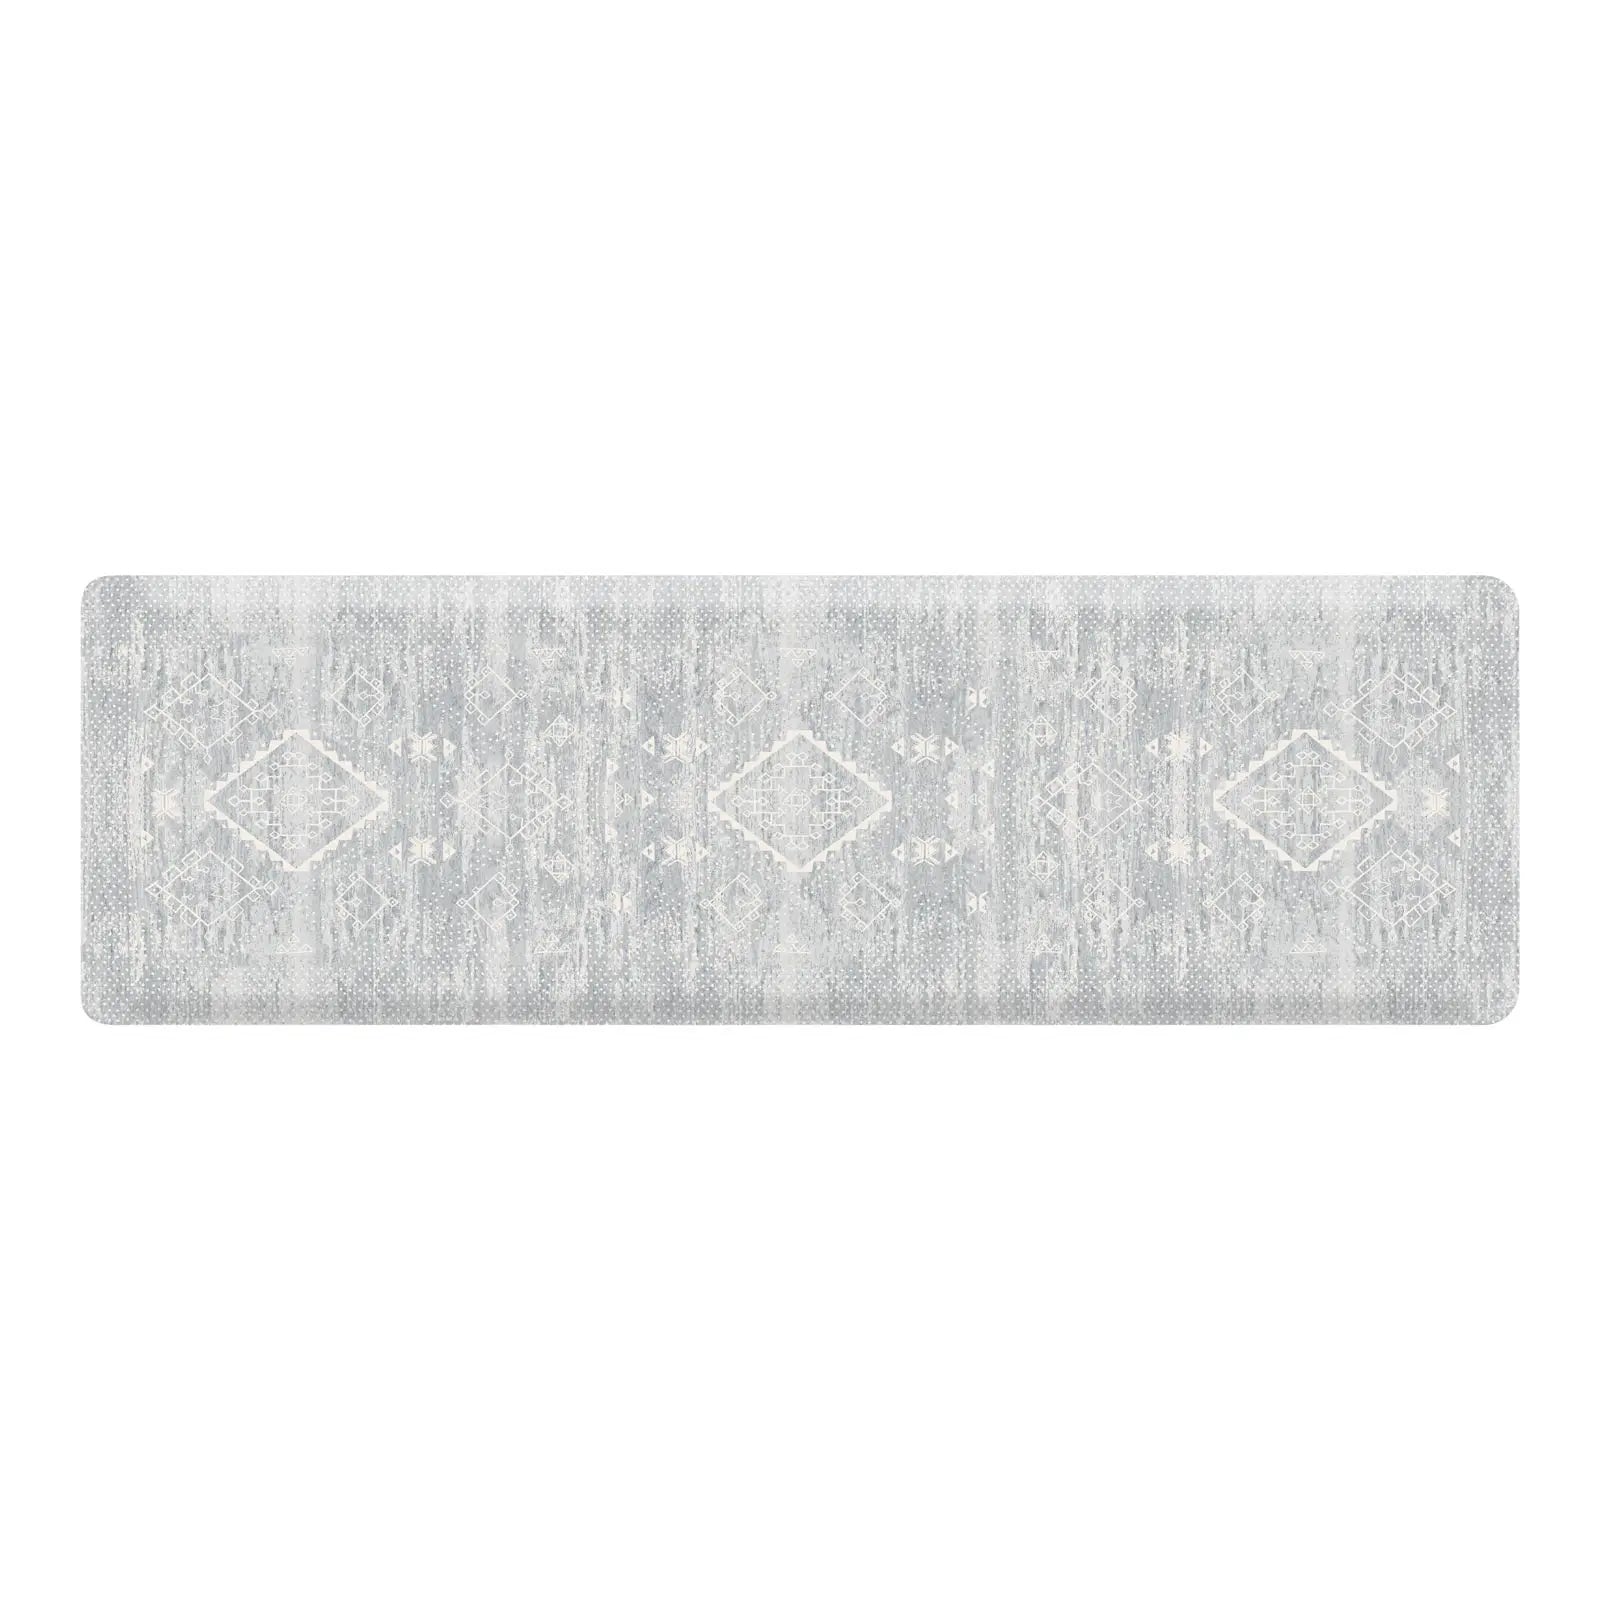 Overhead shot of the Ula gray and white Minimal Boho Pattern anti-fatigue kitchen mat shown in size 22x72